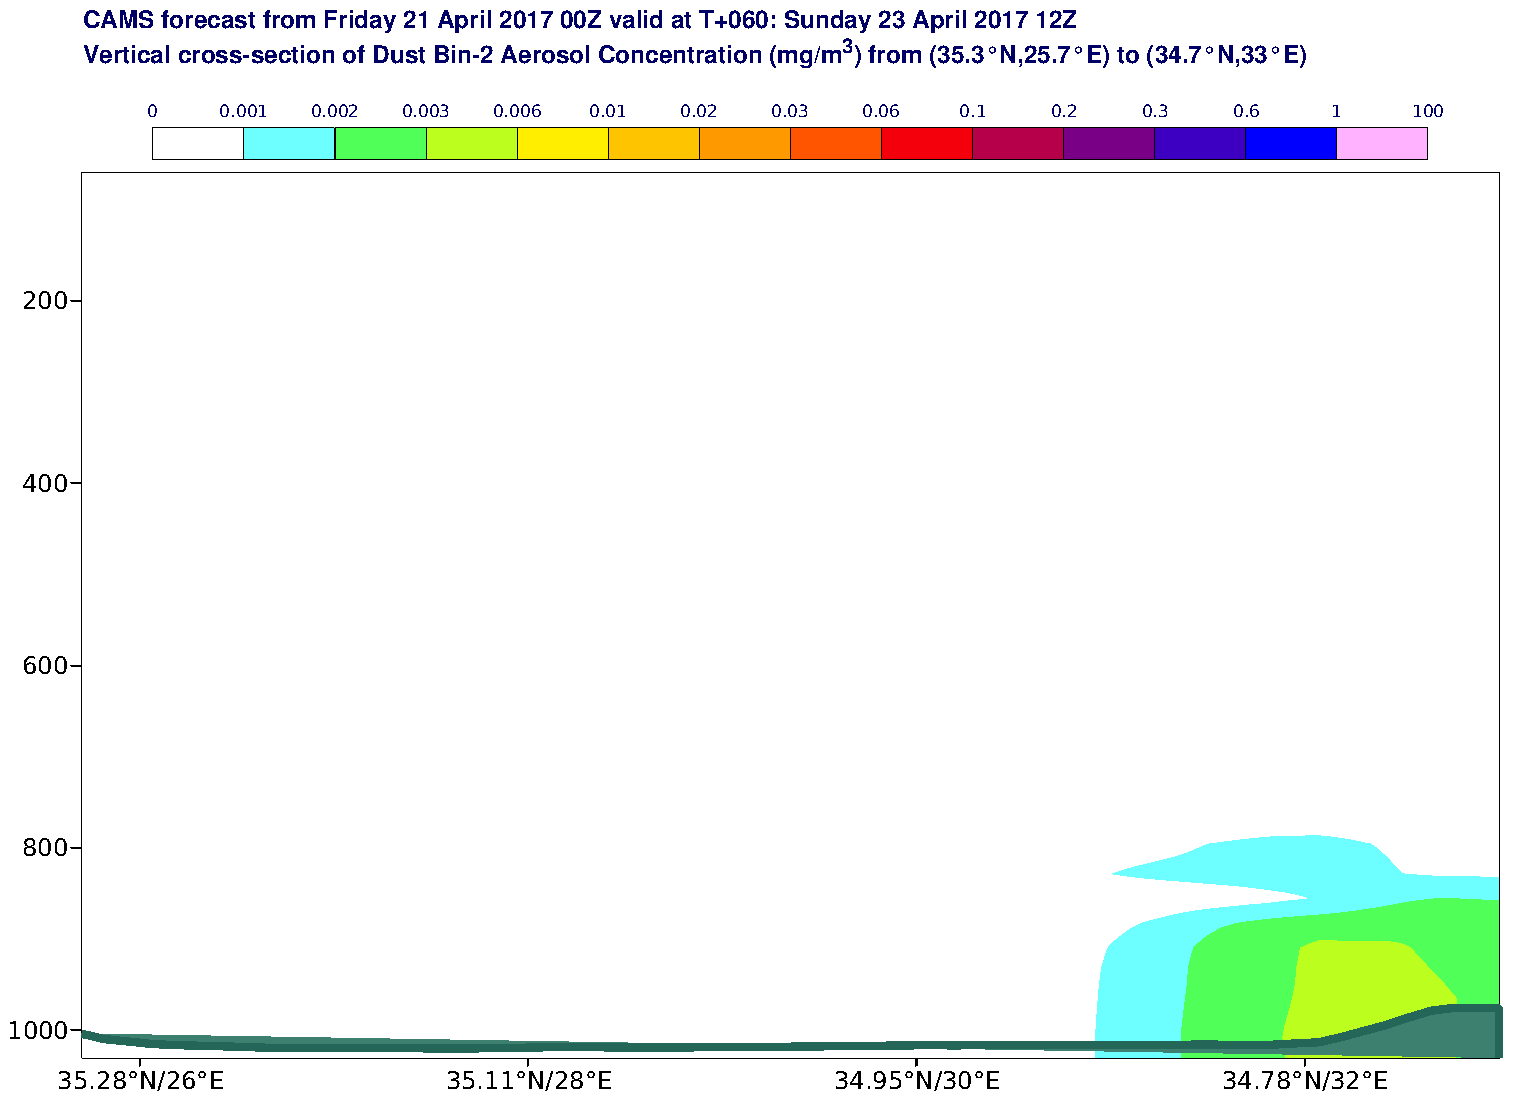 Vertical cross-section of Dust Bin-2 Aerosol Concentration (mg/m3) valid at T60 - 2017-04-23 12:00